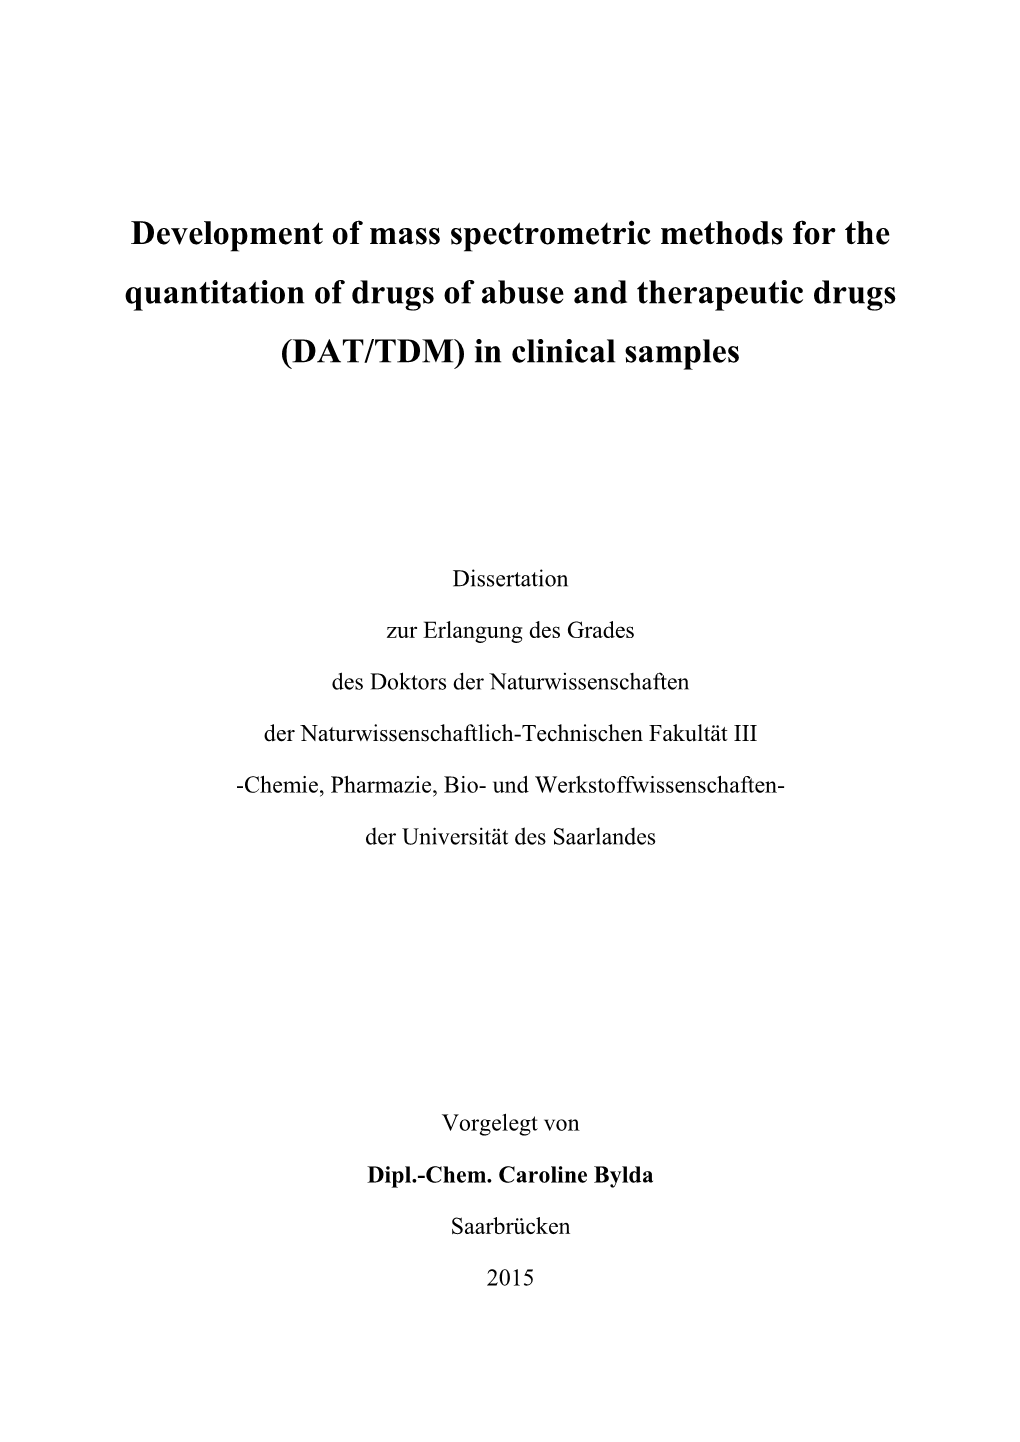 Development of Mass Spectrometric Methods for the Quantitation of Drugs of Abuse and Therapeutic Drugs